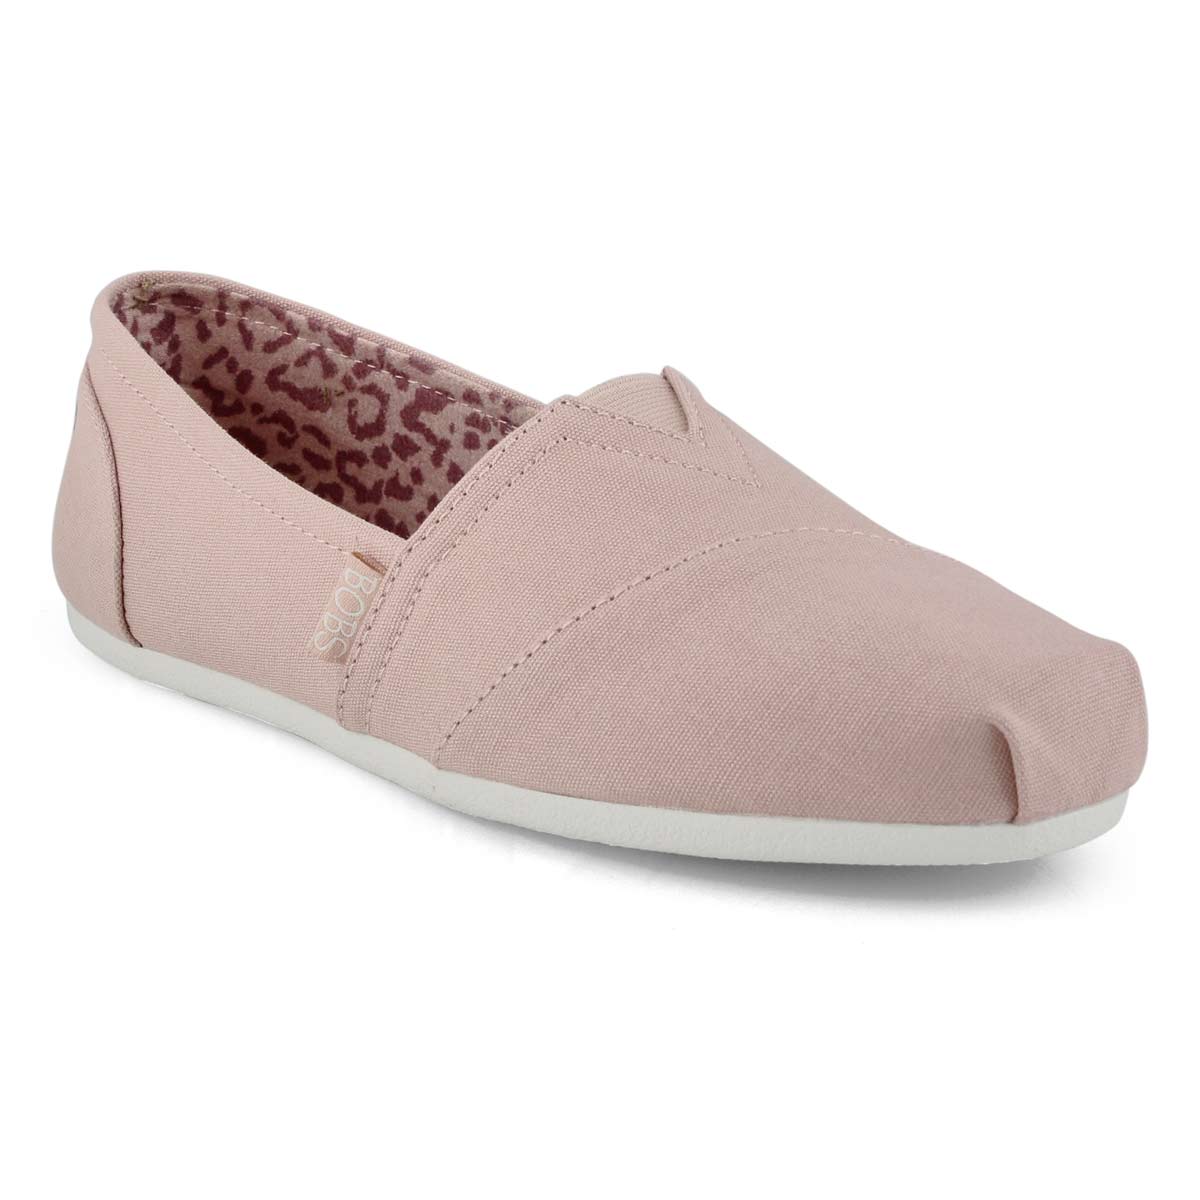 bobs shoes canada sale